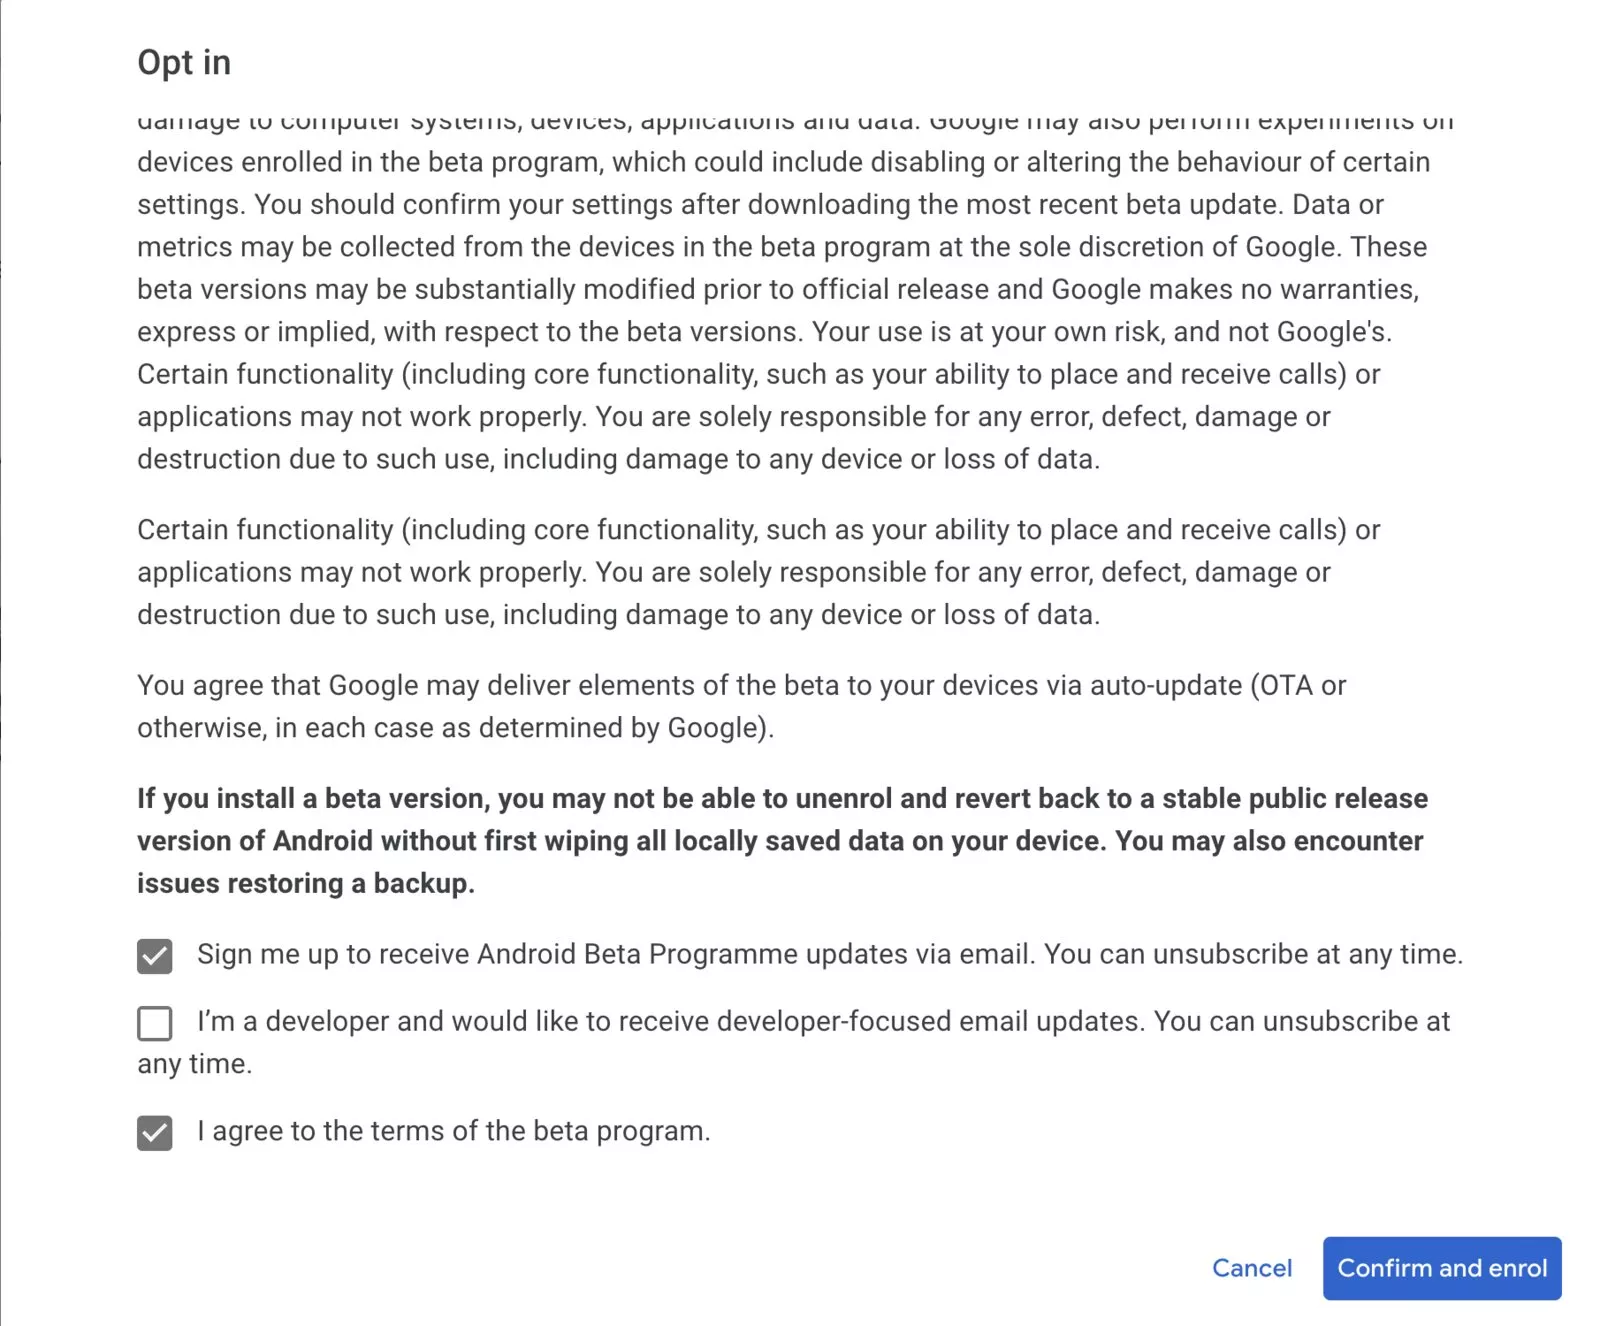 Screenshot of the terms and conditions page of Android 15 beta testing